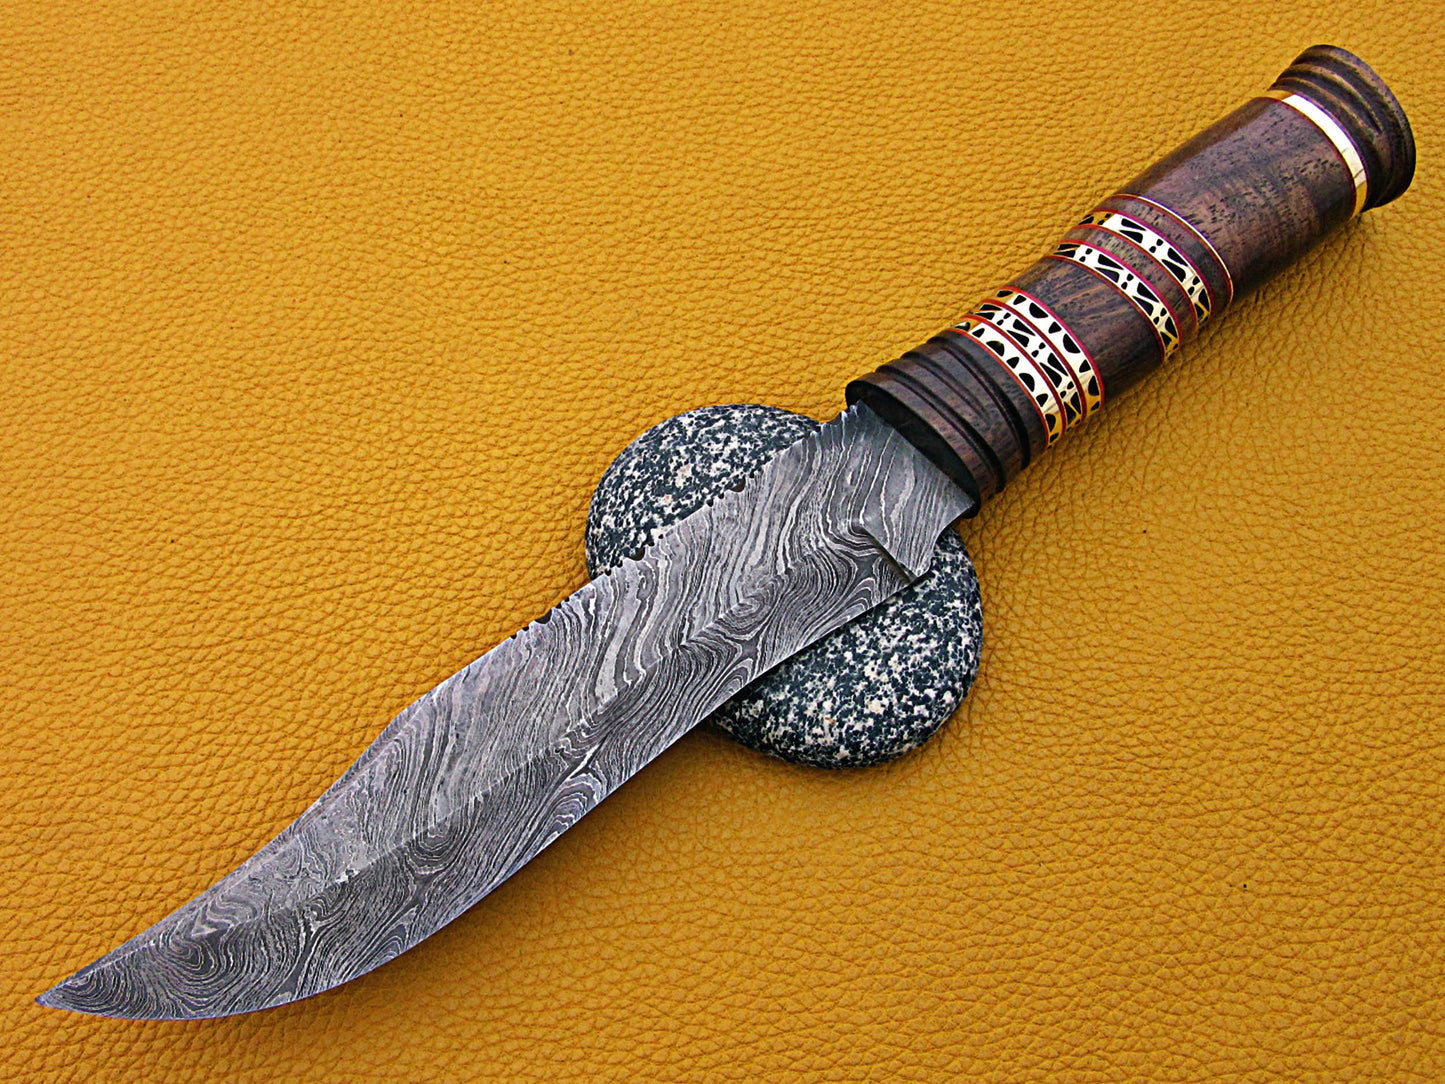 13.5" Long hand forged Damascus steel exotic Hunting Knife with 7" blade, Exotic Rose wood scale crafted with engraved brass & fiber spacing, Cow Leather sheath included